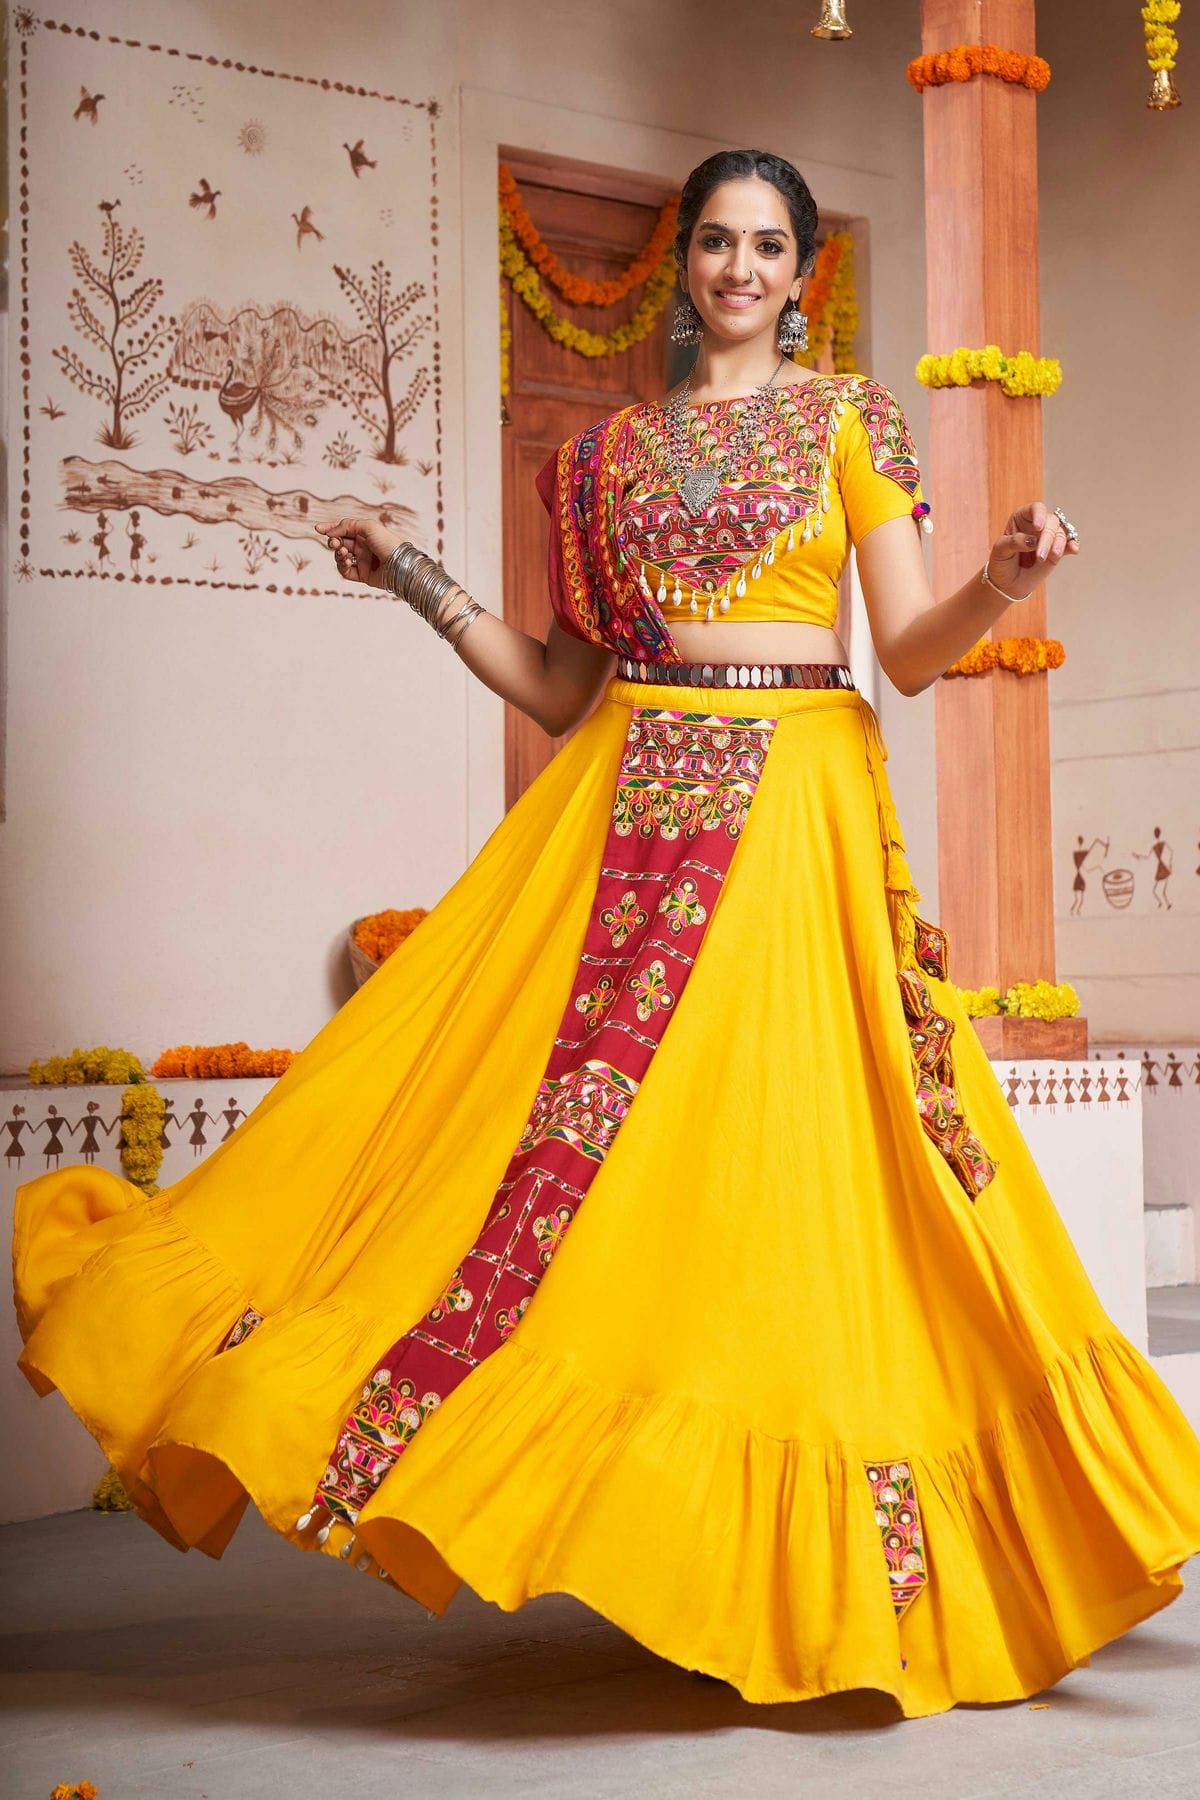 Nothing We Love More Than A Glimmering Mirrorwork Lehenga! | Mirror work  lehenga, Orange lehenga, Indian bridal outfits